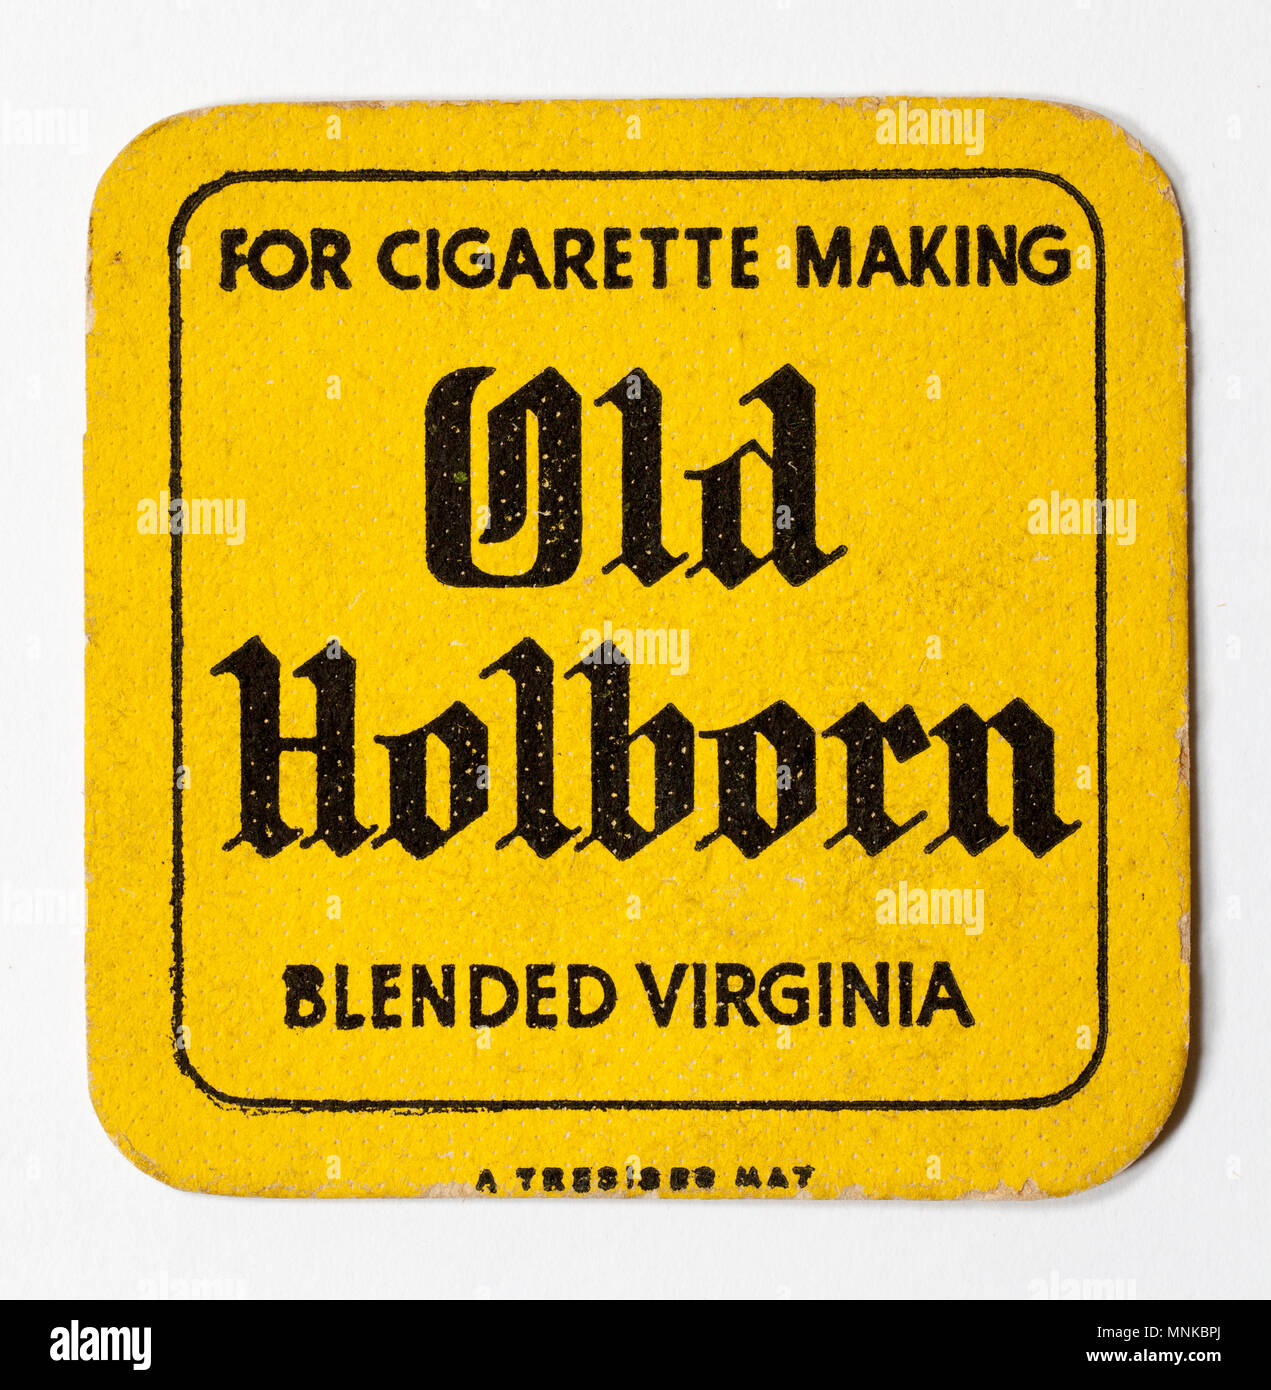 Vintage Beer Mat advertising Old Holborn Tobacco Stock Photo